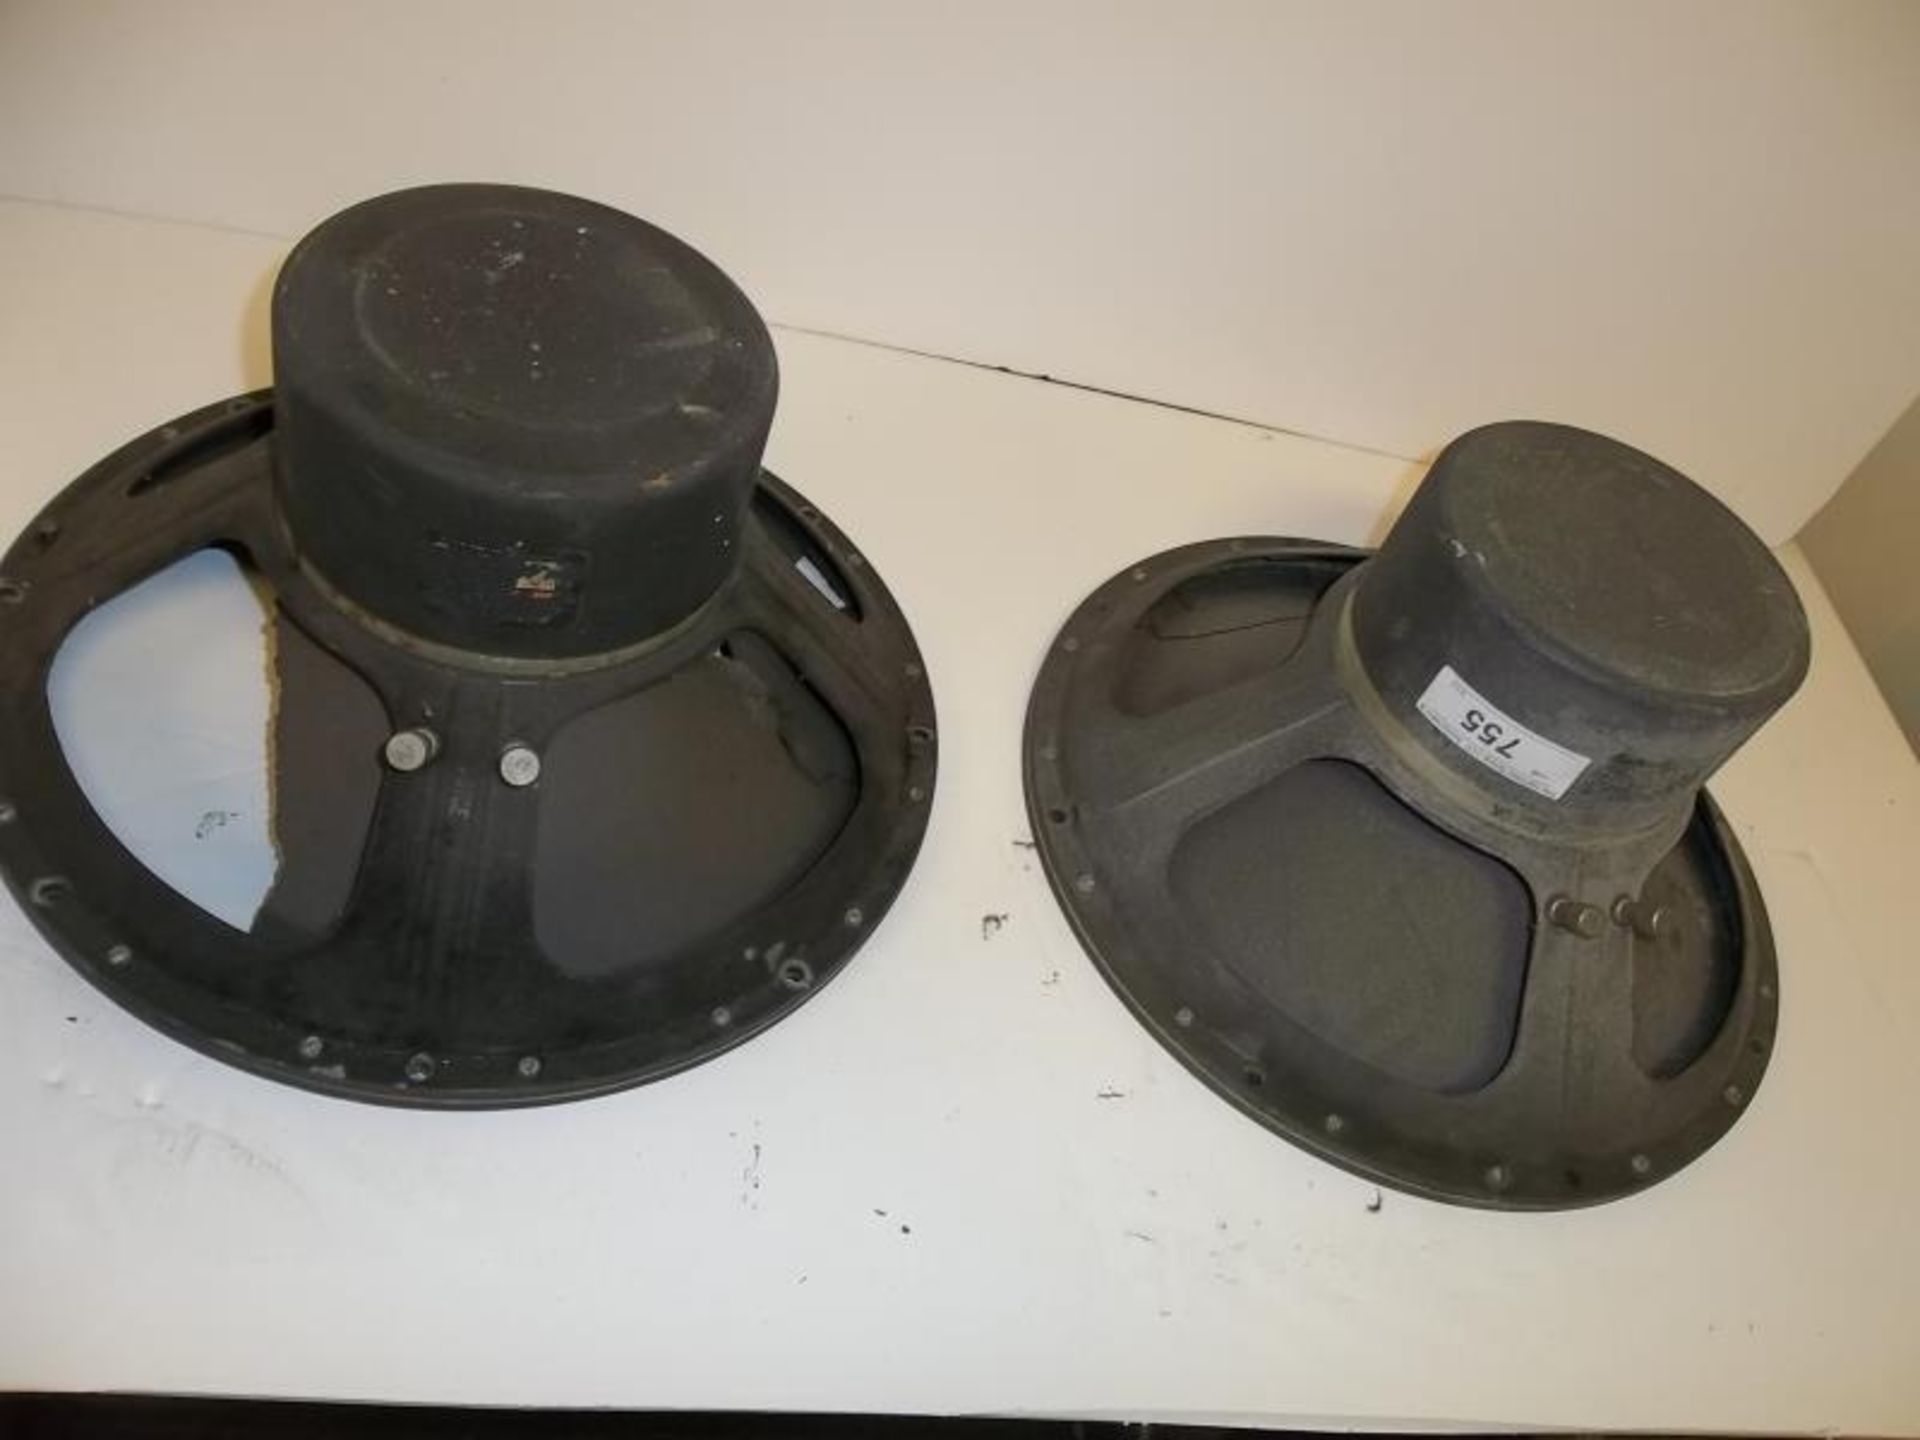 2 Altec loud speakers, 15", one is stamped Altec Lansing Hollywood, one is Altec model 515, S#